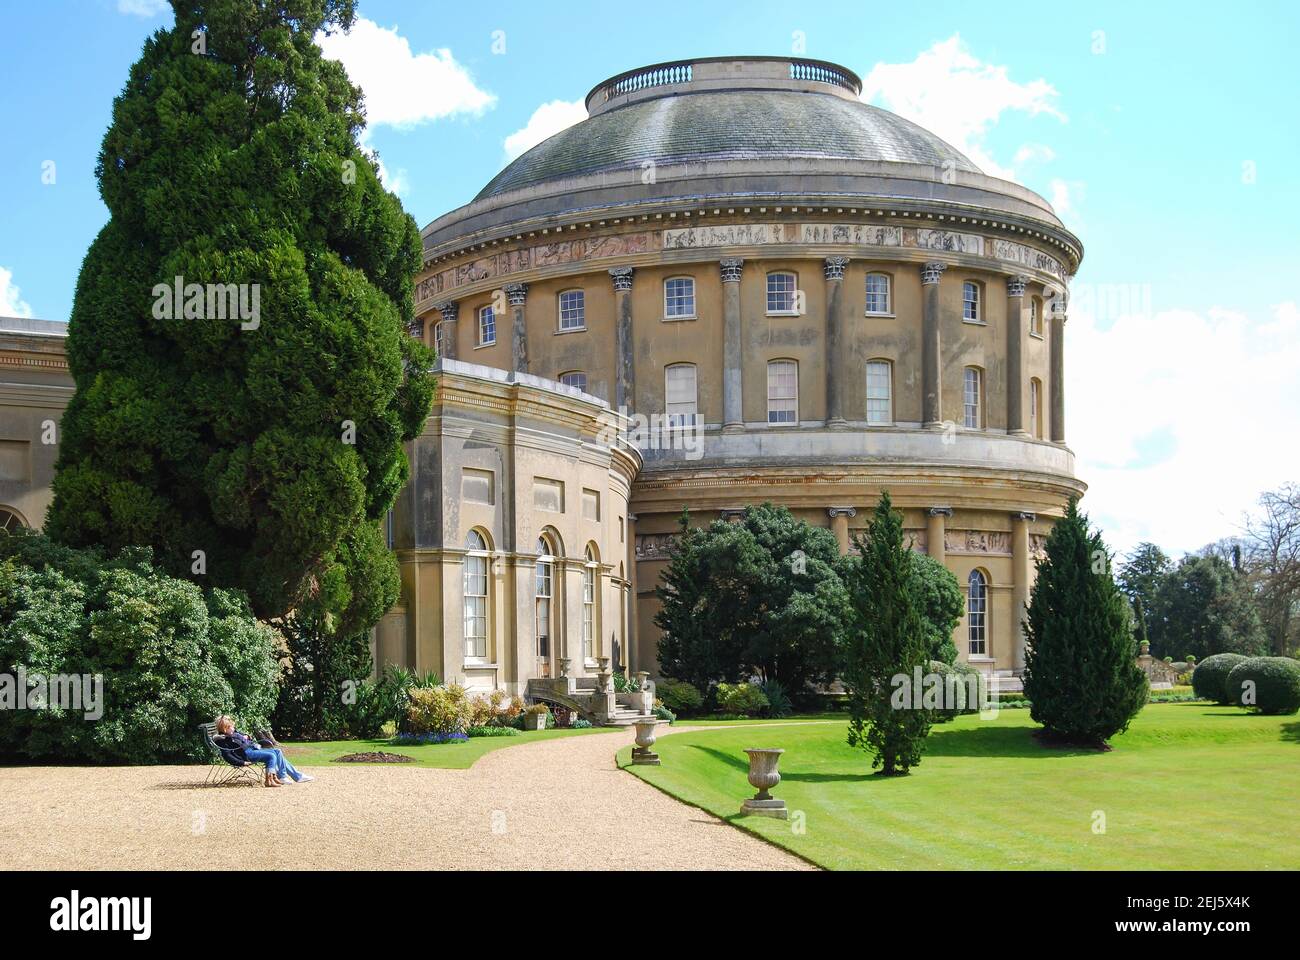 Ickworth House and Gardens, Bury St Edmunds, Suffolk, Inghilterra, Regno Unito Foto Stock